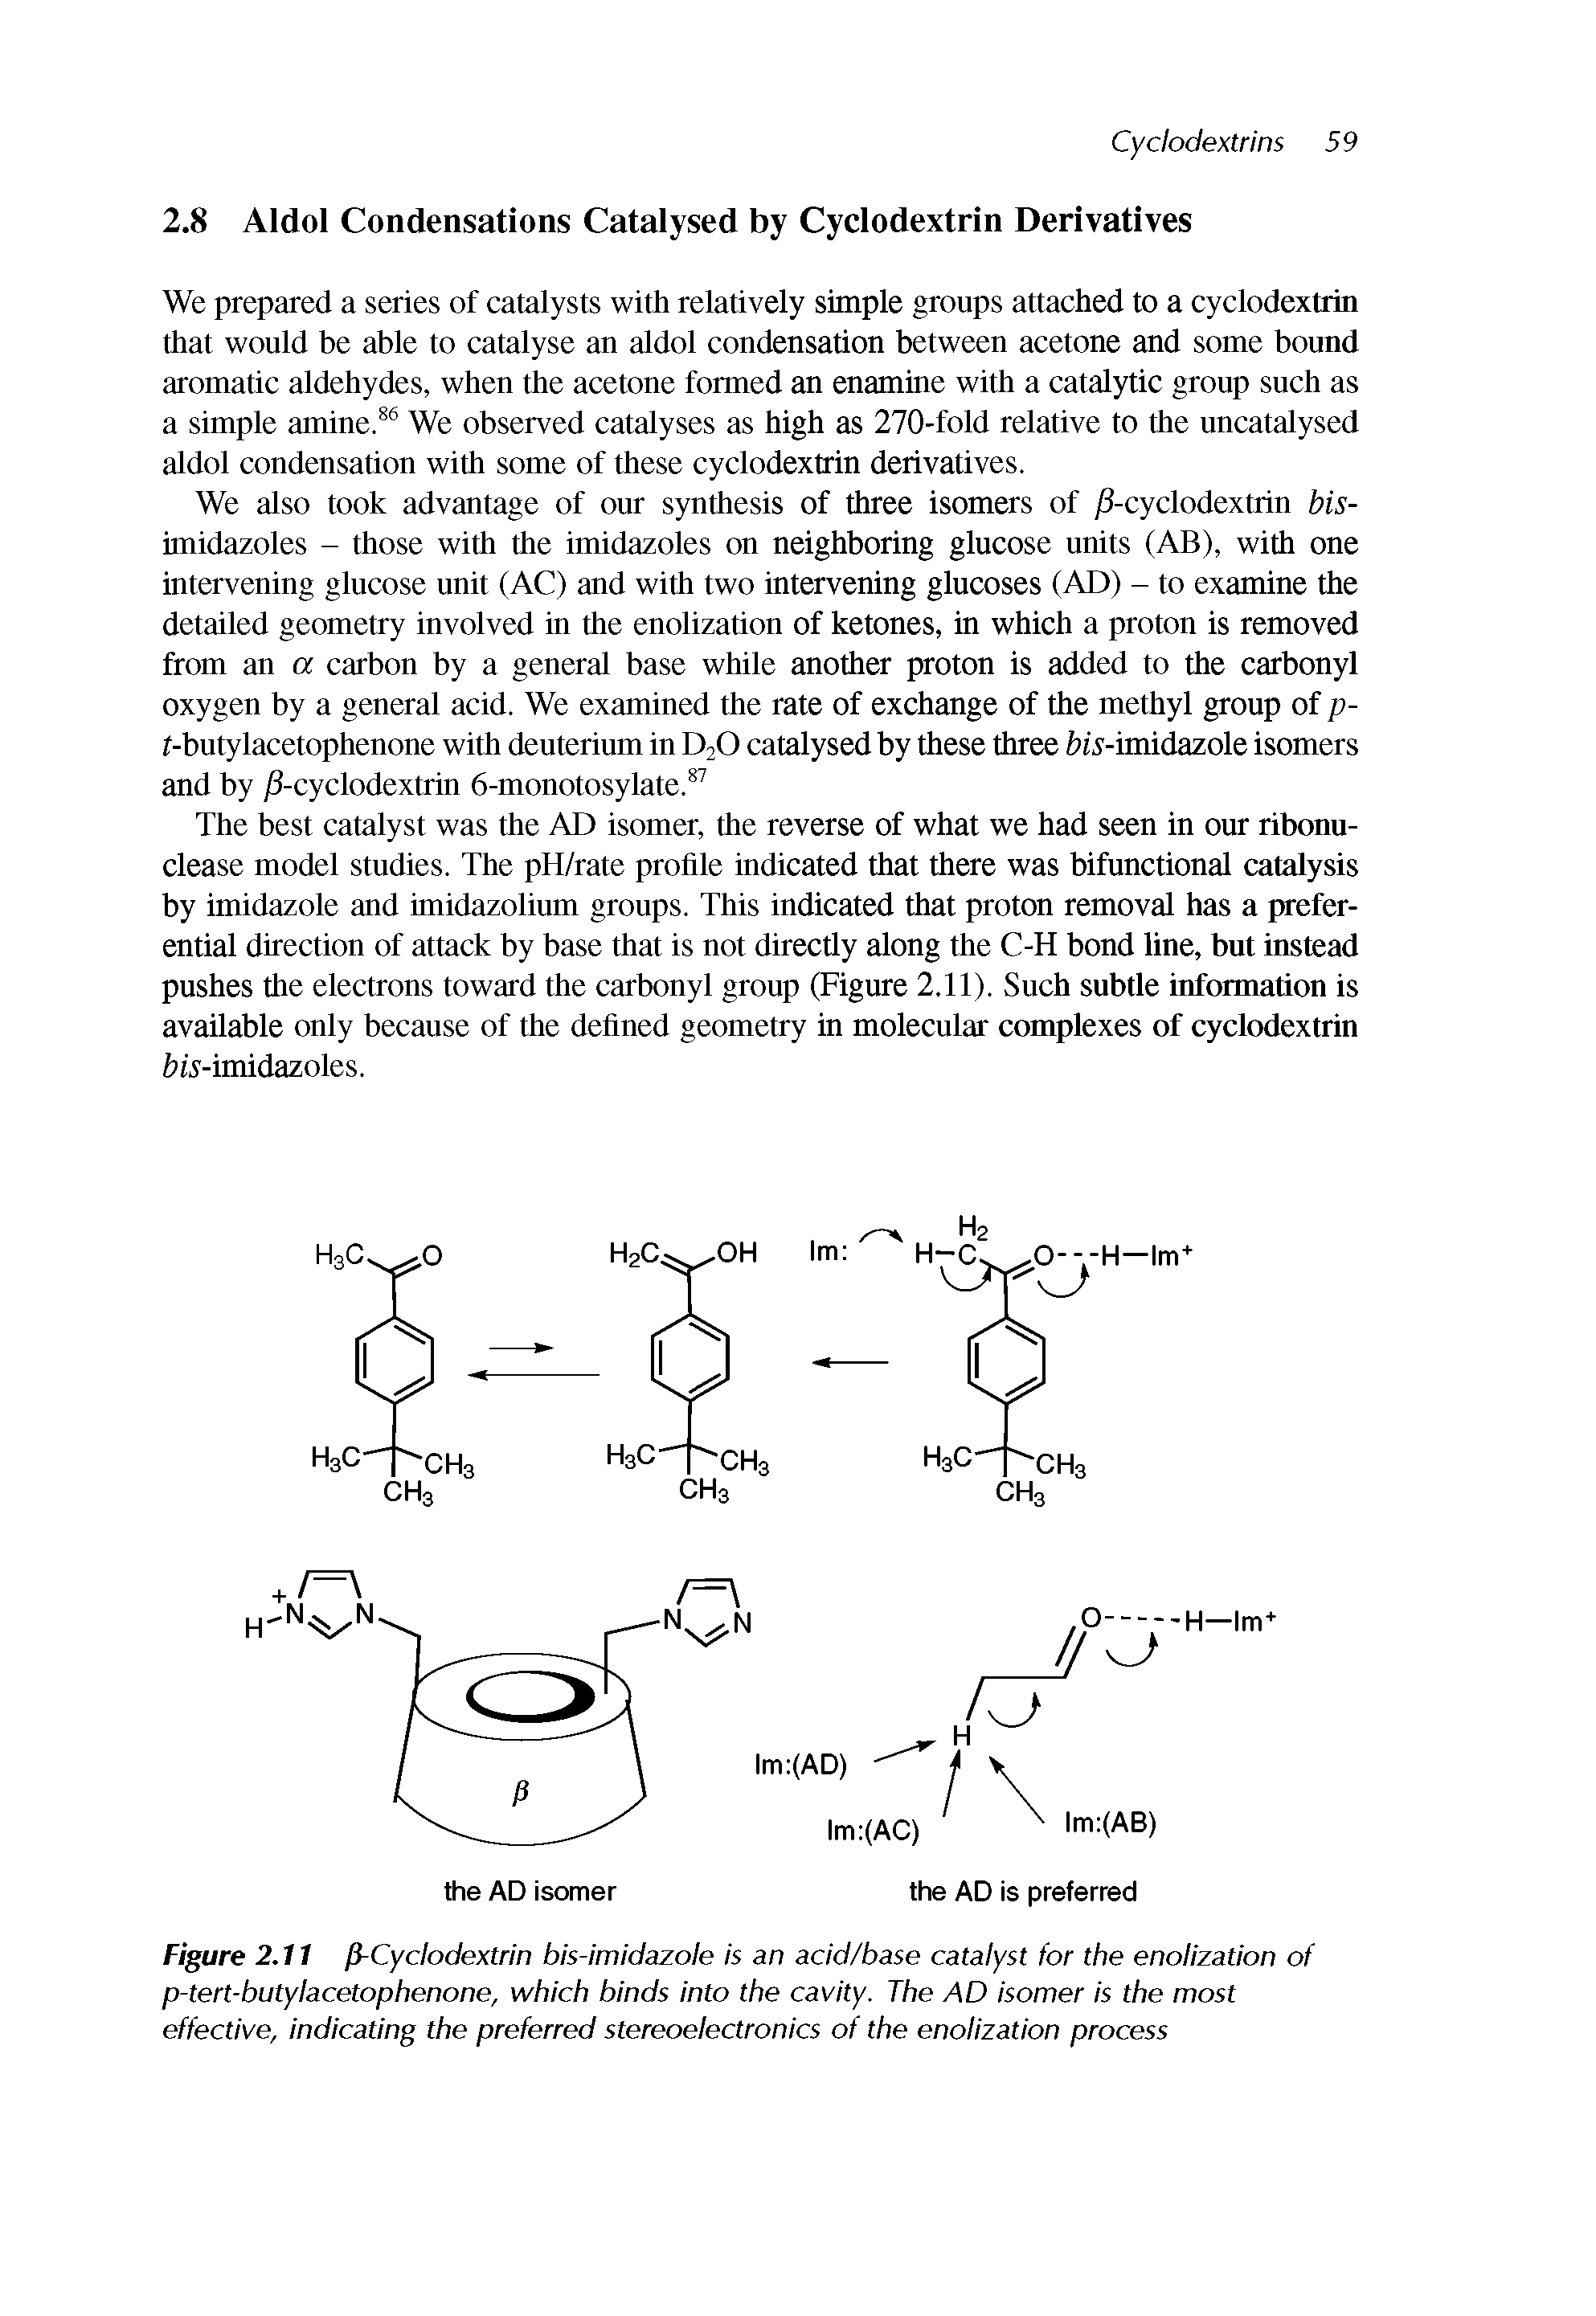 Figure 2.11 P-Cyclodextrin bis-imidazole is an acid/base catalyst for the enolization of p-tert-butylacetophenone, which binds into the cavity. The AD isomer is the most effective, indicating the preferred stereoelectronics of the enolization process...